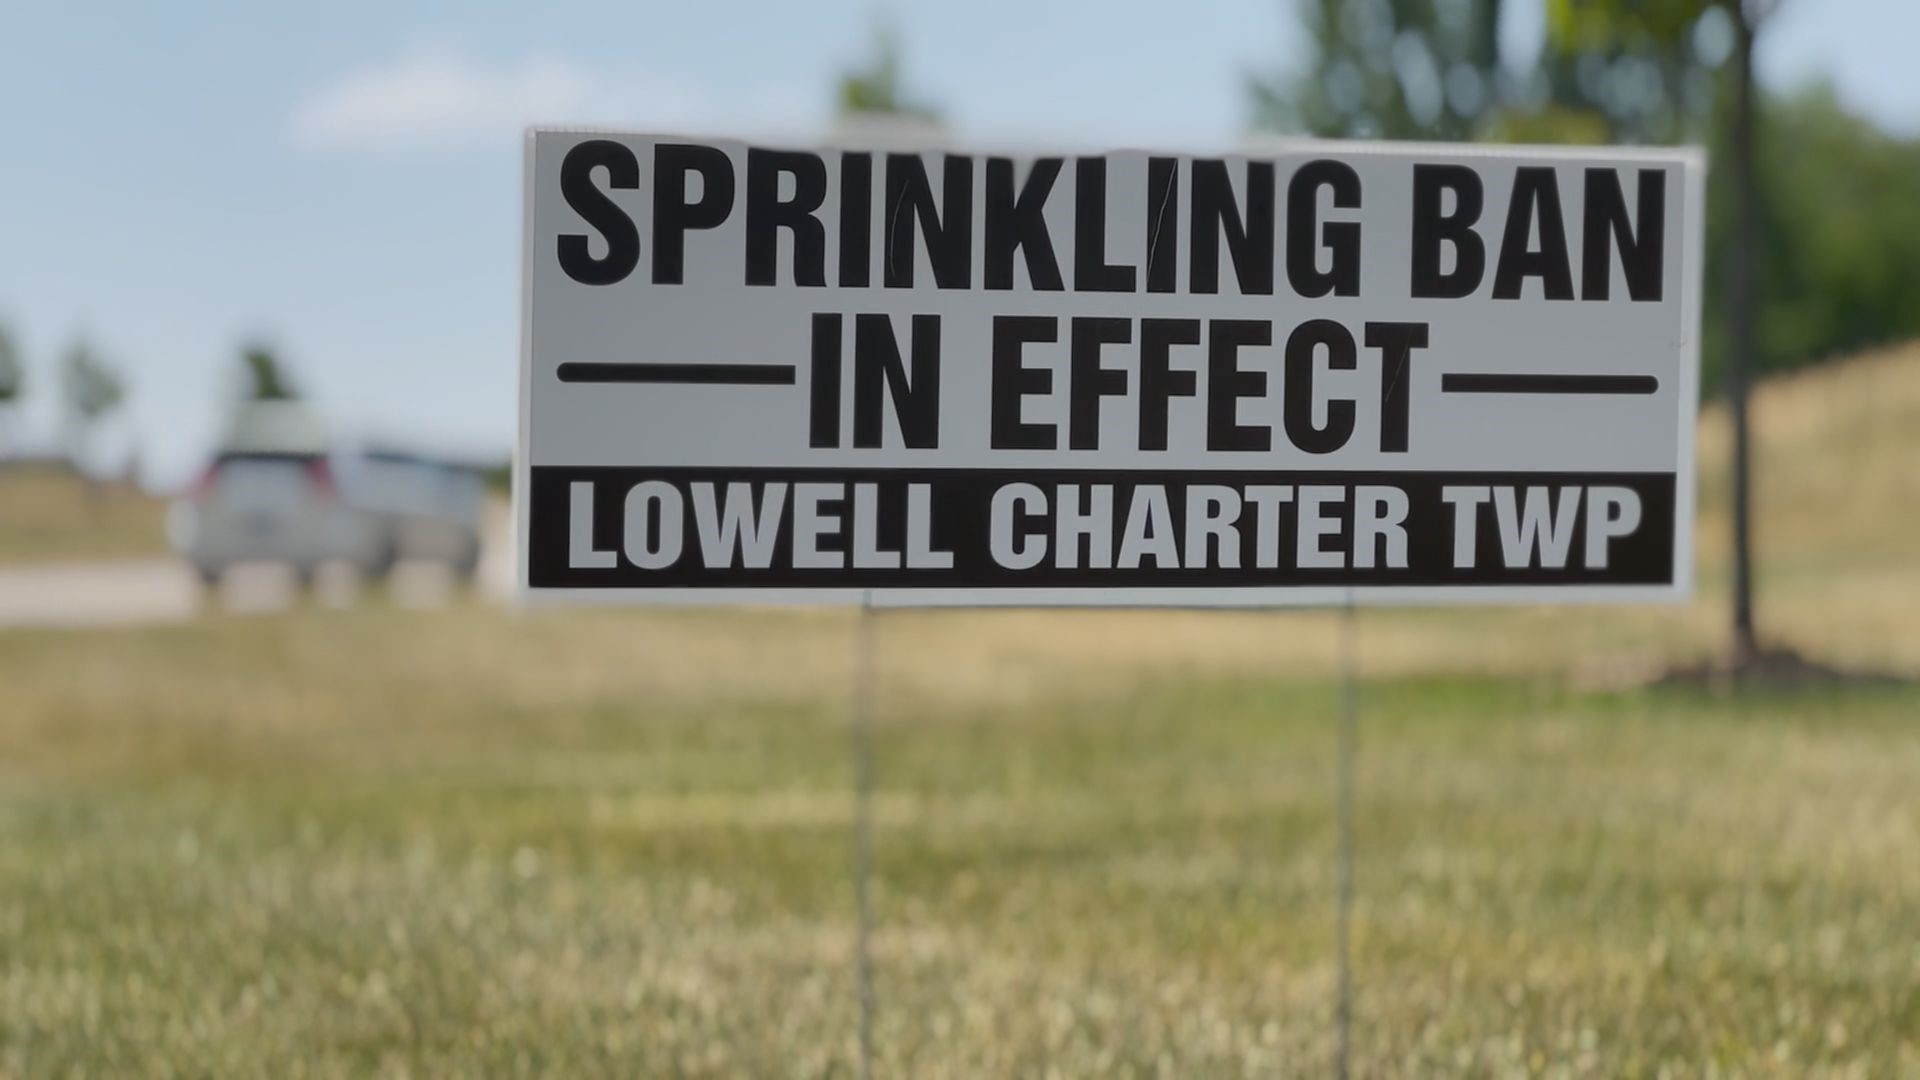 Due to the recent hot, dry weather, the city and township has seen a double-digit spike in water demand.